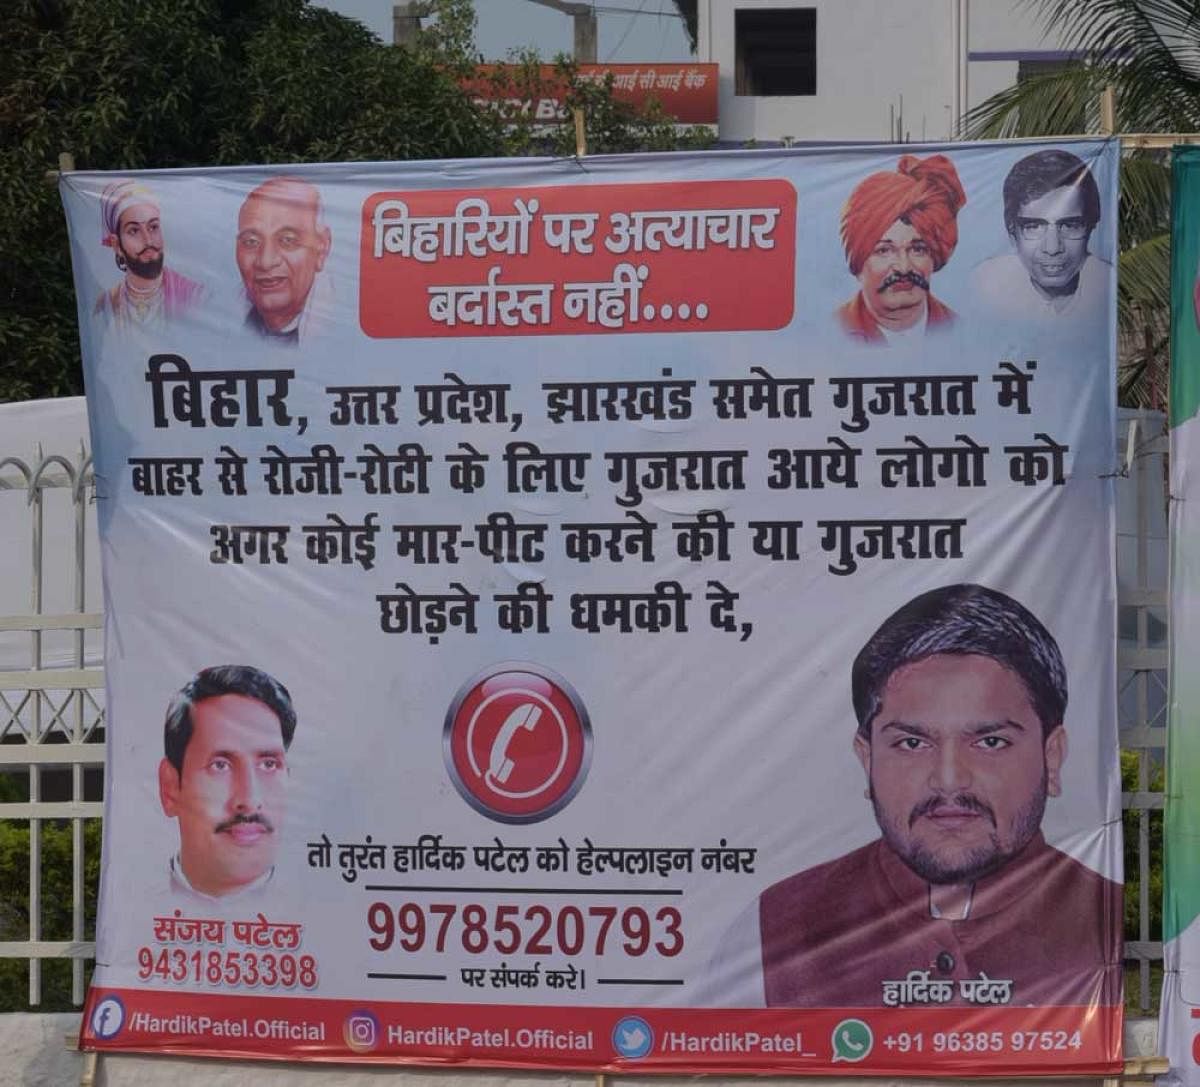 Patidar leader Hardik Patel has asked his men to put up posters and hoardings in Patna promising protection to those fleeing the western state.